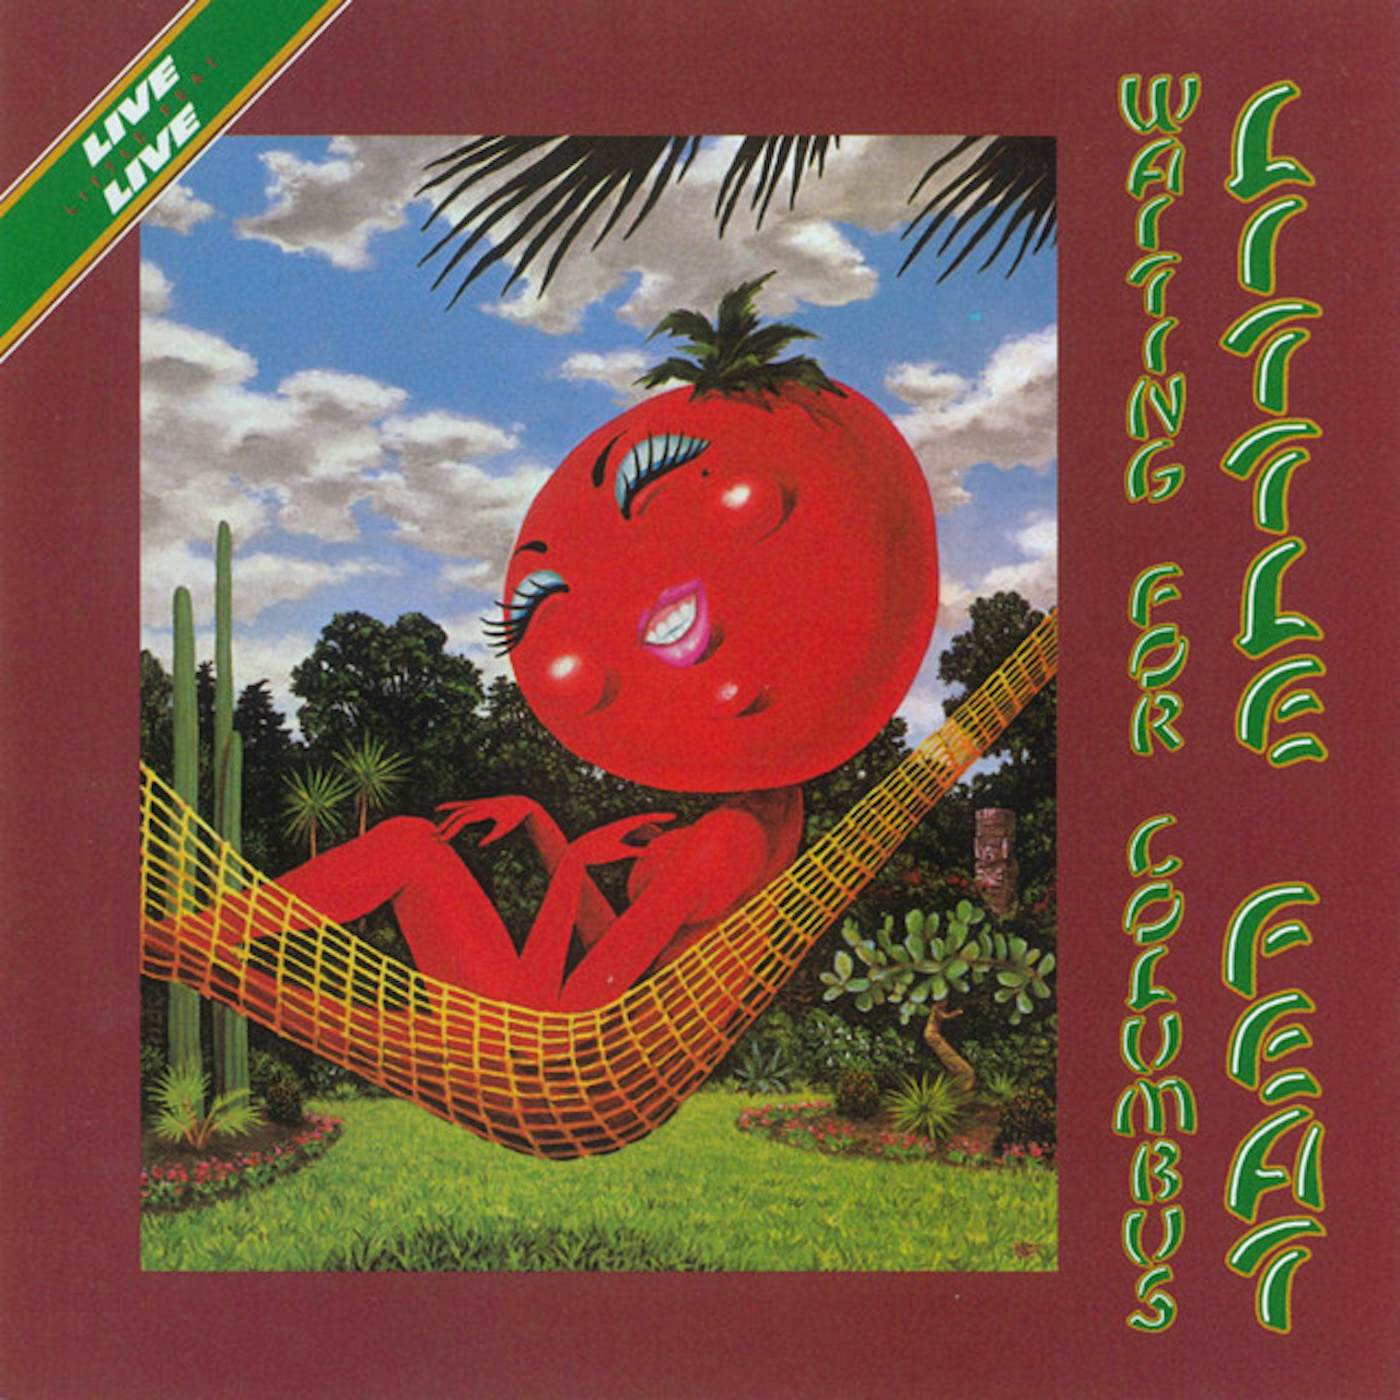 Little Feat Waiting For Columbus (2LP/Tomato Red) (Rsd Essential) Vinyl Record